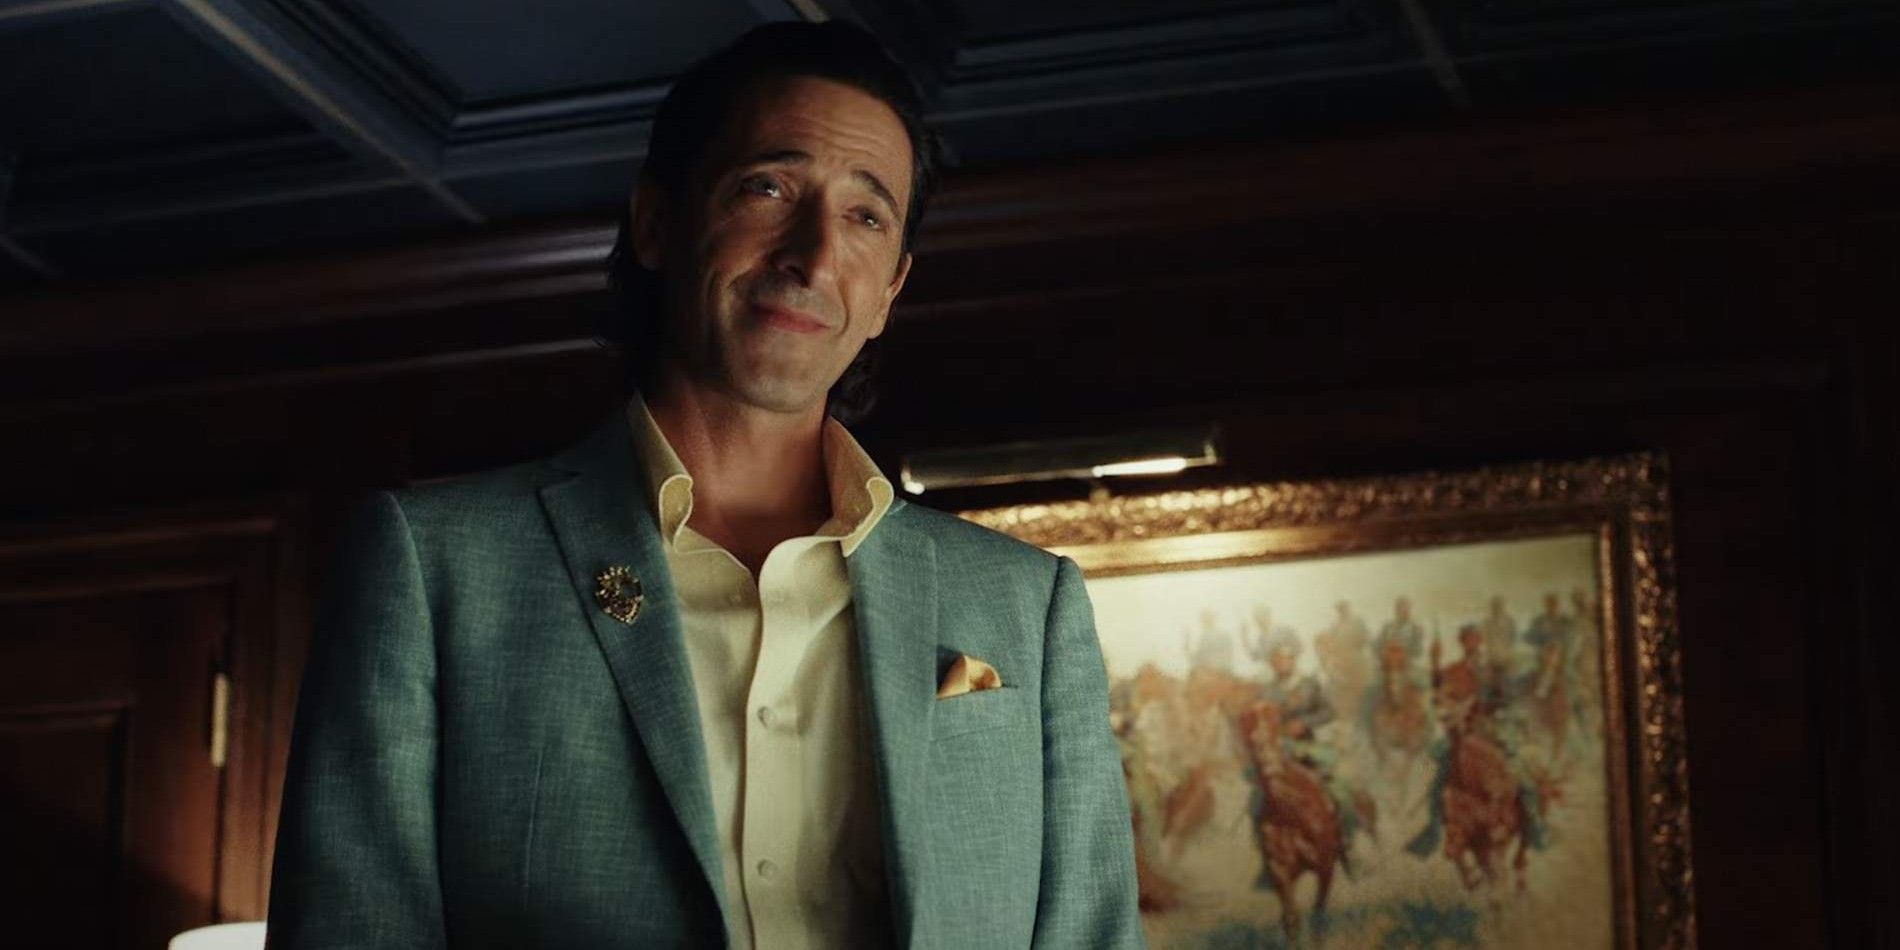 Adrien Brody Has Boarded Rian Johnson's Peacock Series Poker Face